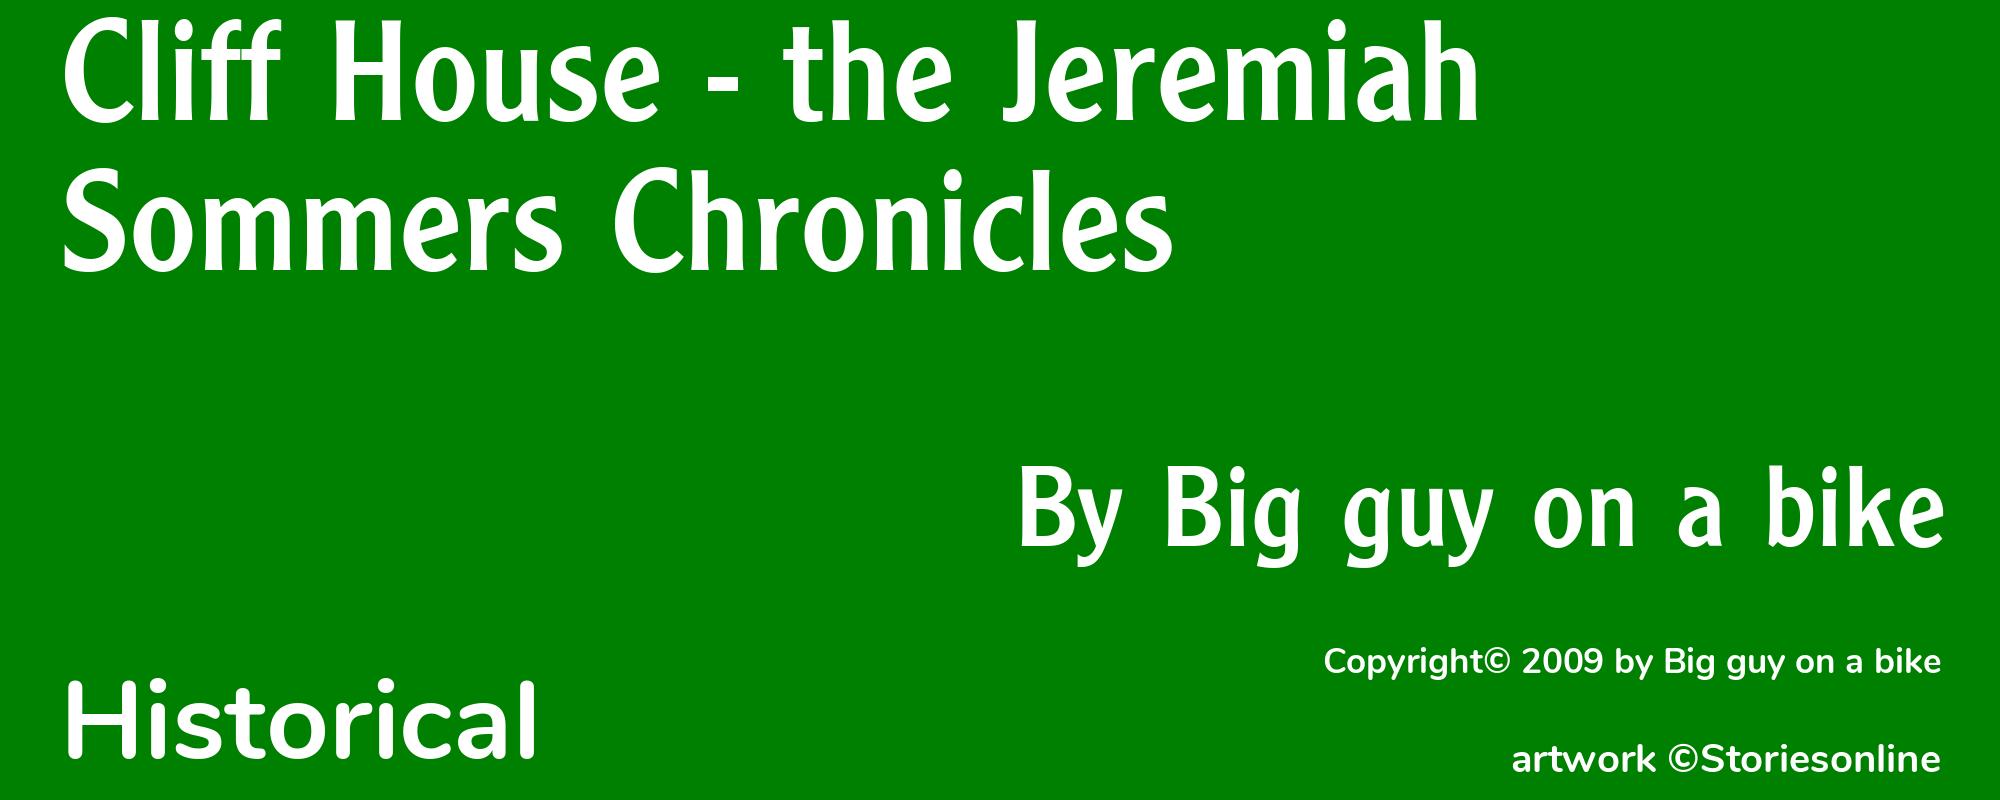 Cliff House - the Jeremiah Sommers Chronicles - Cover